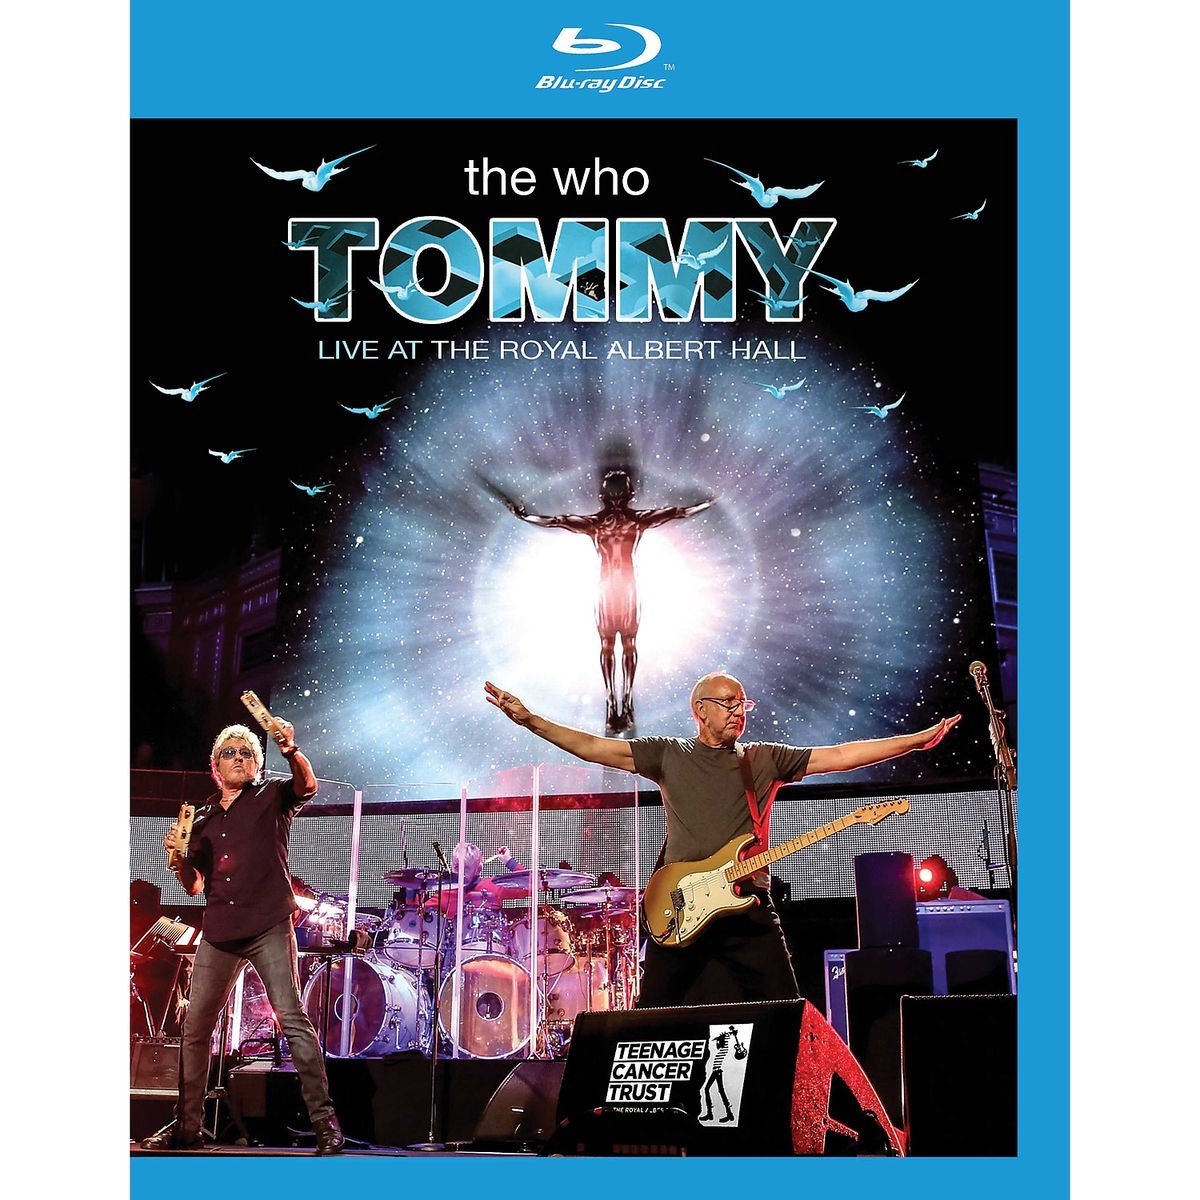 The Who - Tommy (Live At The Royal Albert Hall) (Blu-ray)